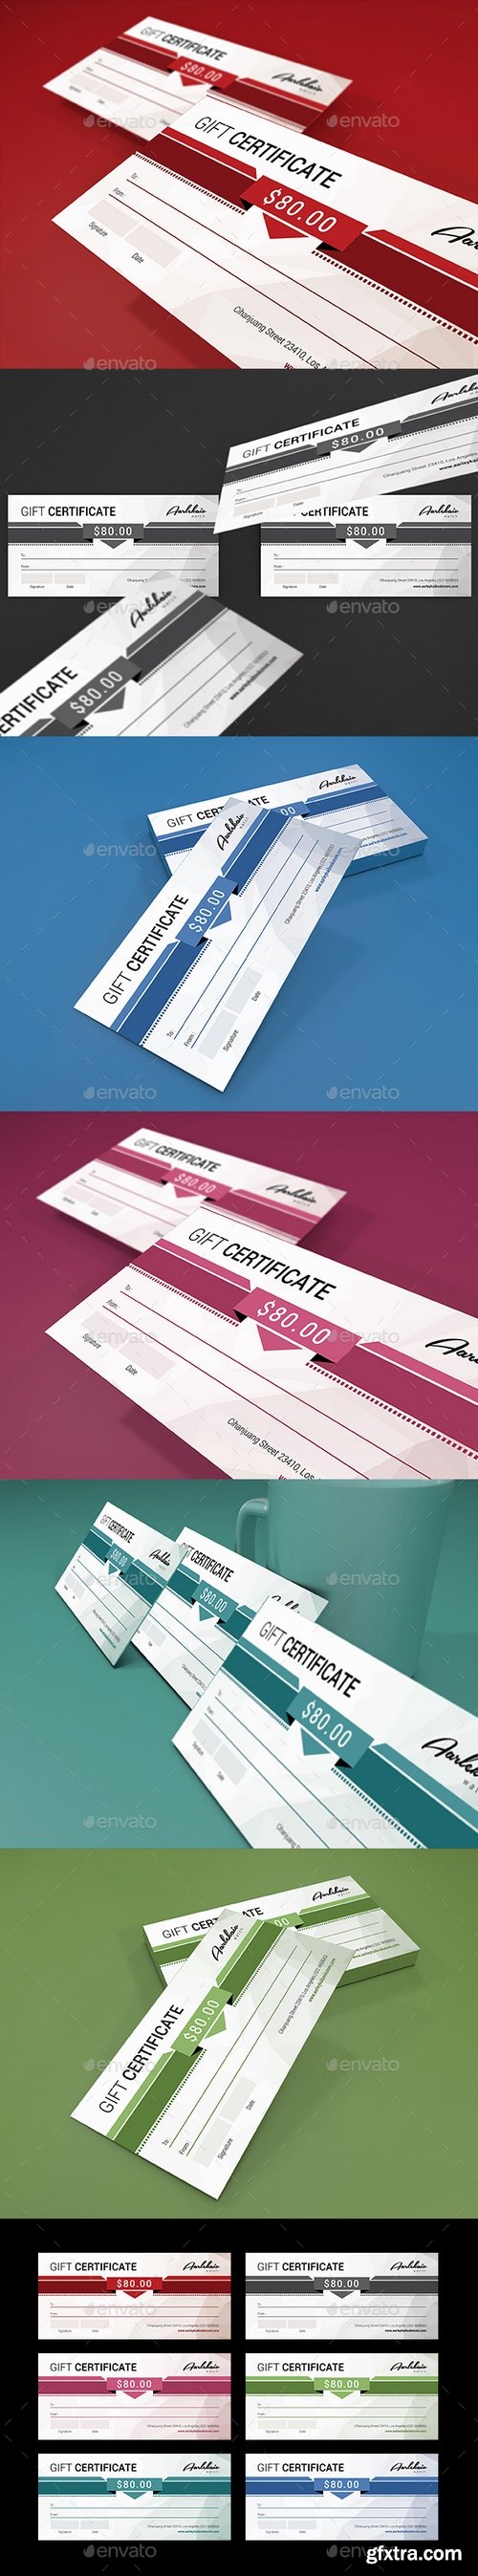 Graphicriver - Colorfull Gift Certificate 18147231